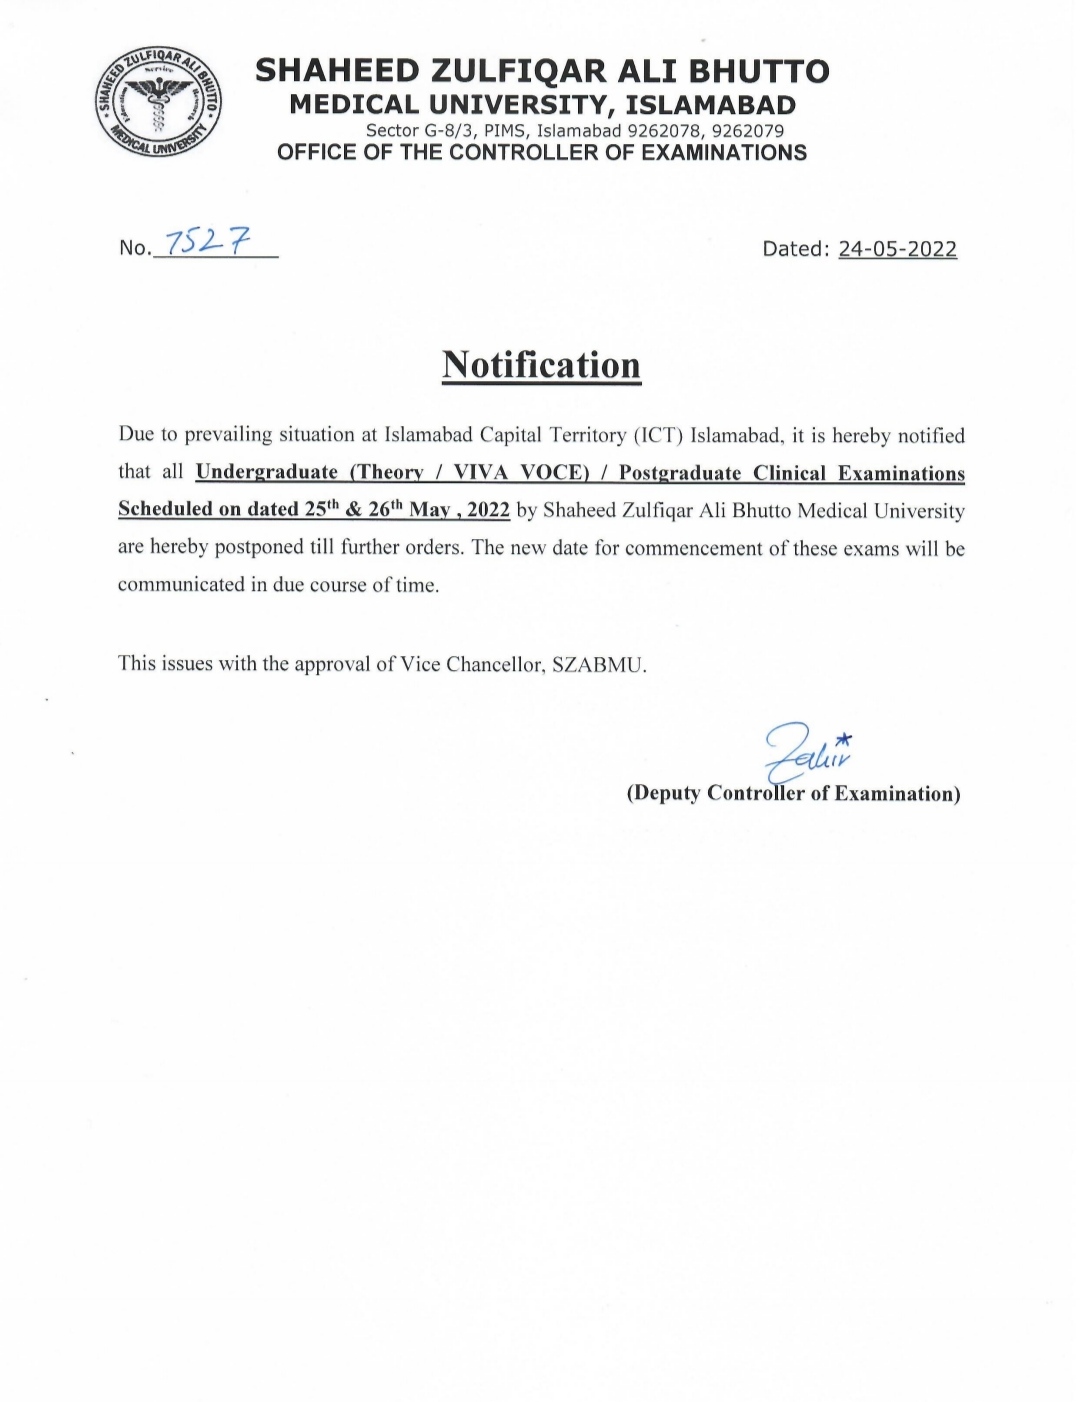 Notification - Postponement of Exam scheduled on 25 and 26 may 2022